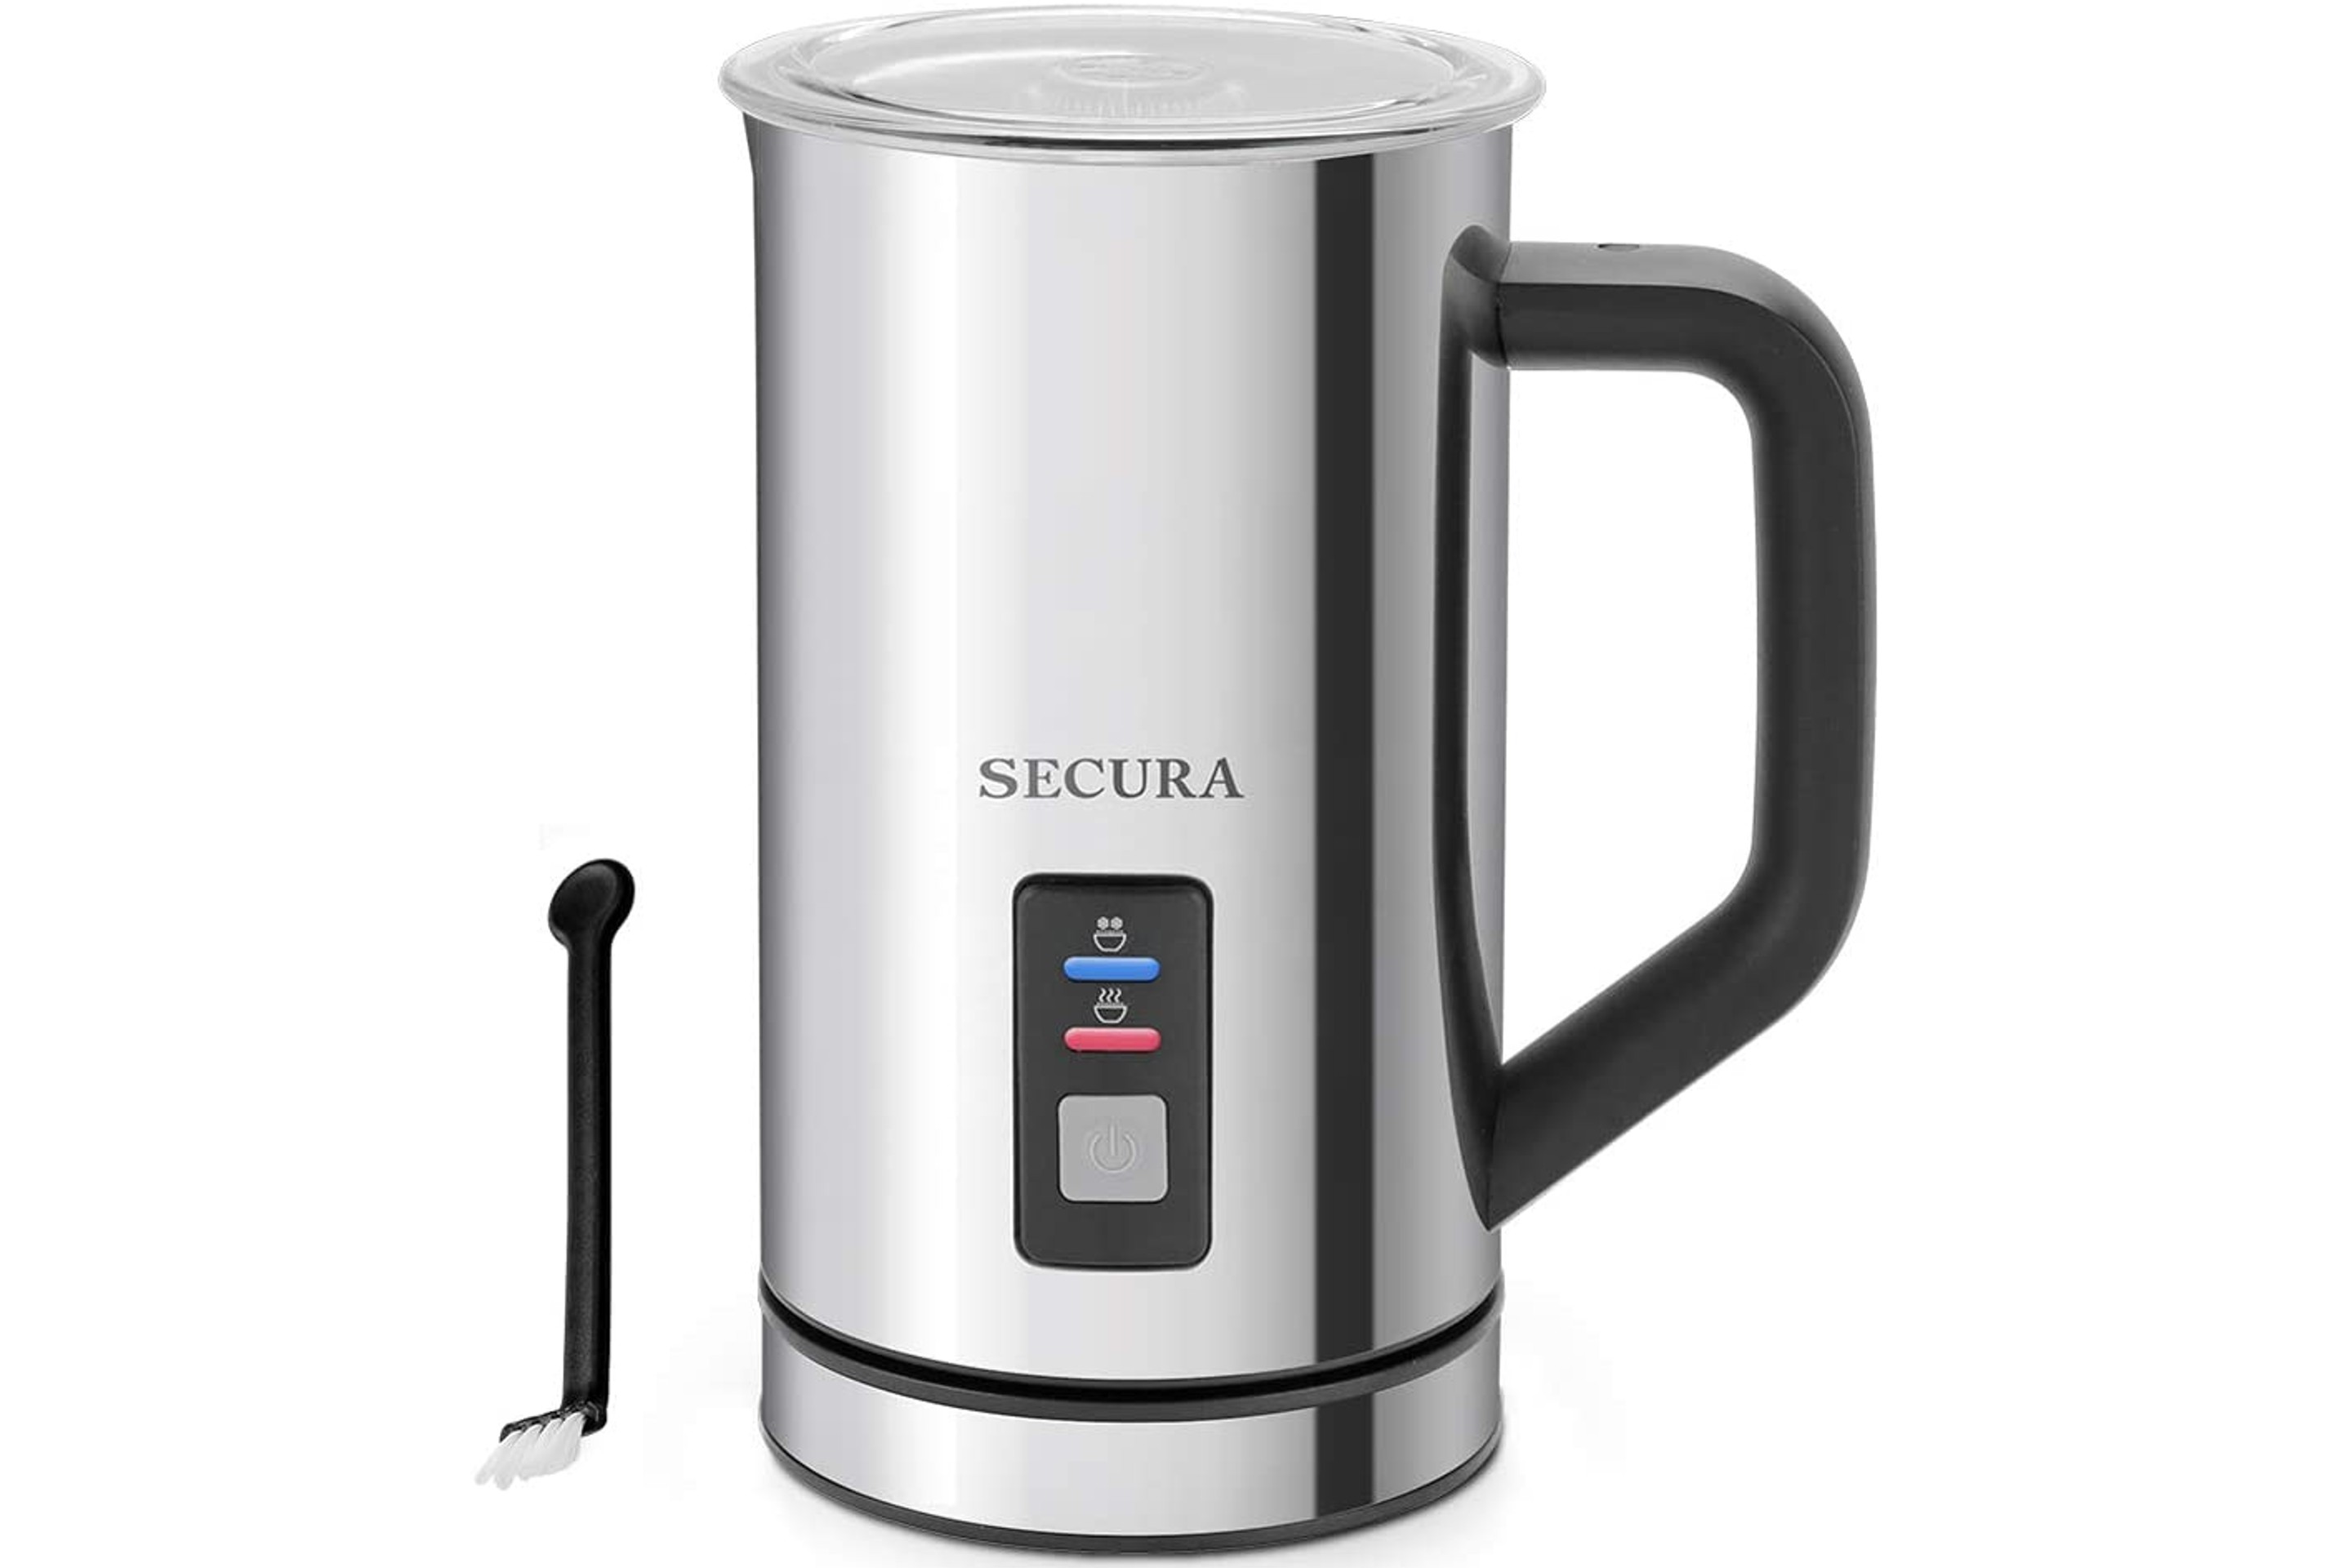 Secura Electric Milk Frother and Steamer